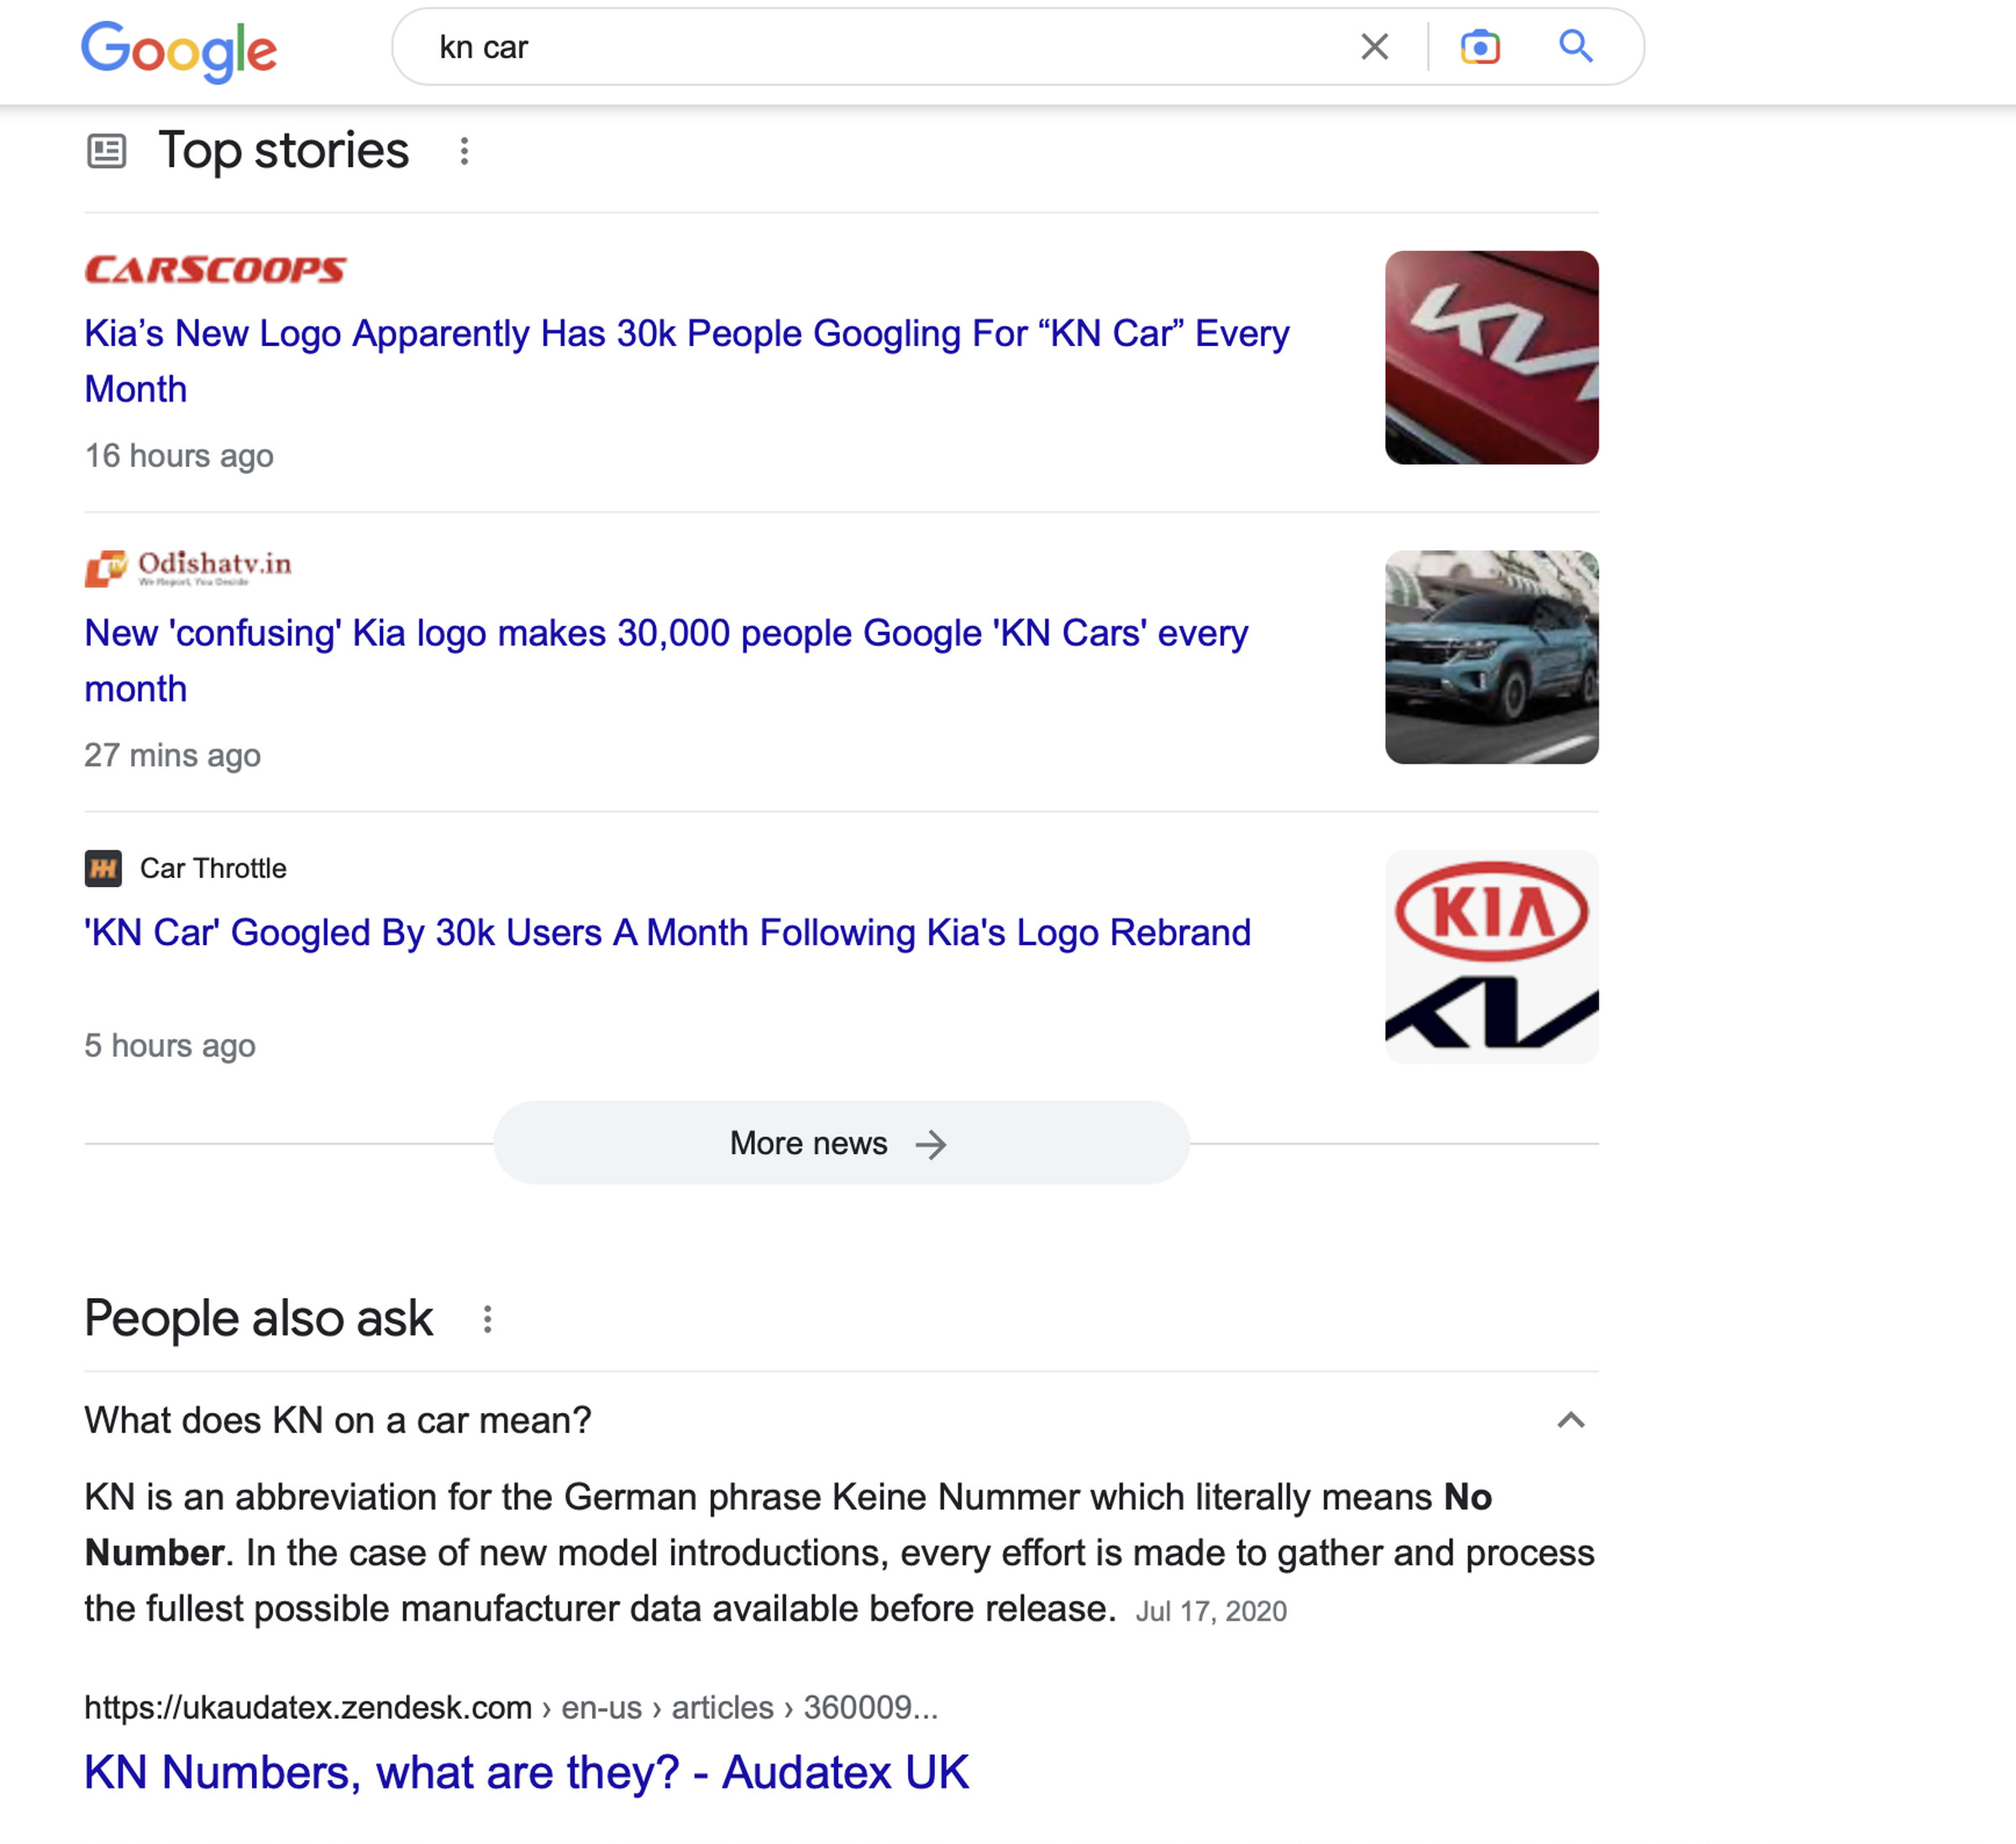 Screenshot of the top Google search results for KN car, showing three news stories and an answer for “what does KN on a car mean, which reads “KN is an abbreviation for the german phraose kiene nummer which literally means no number.